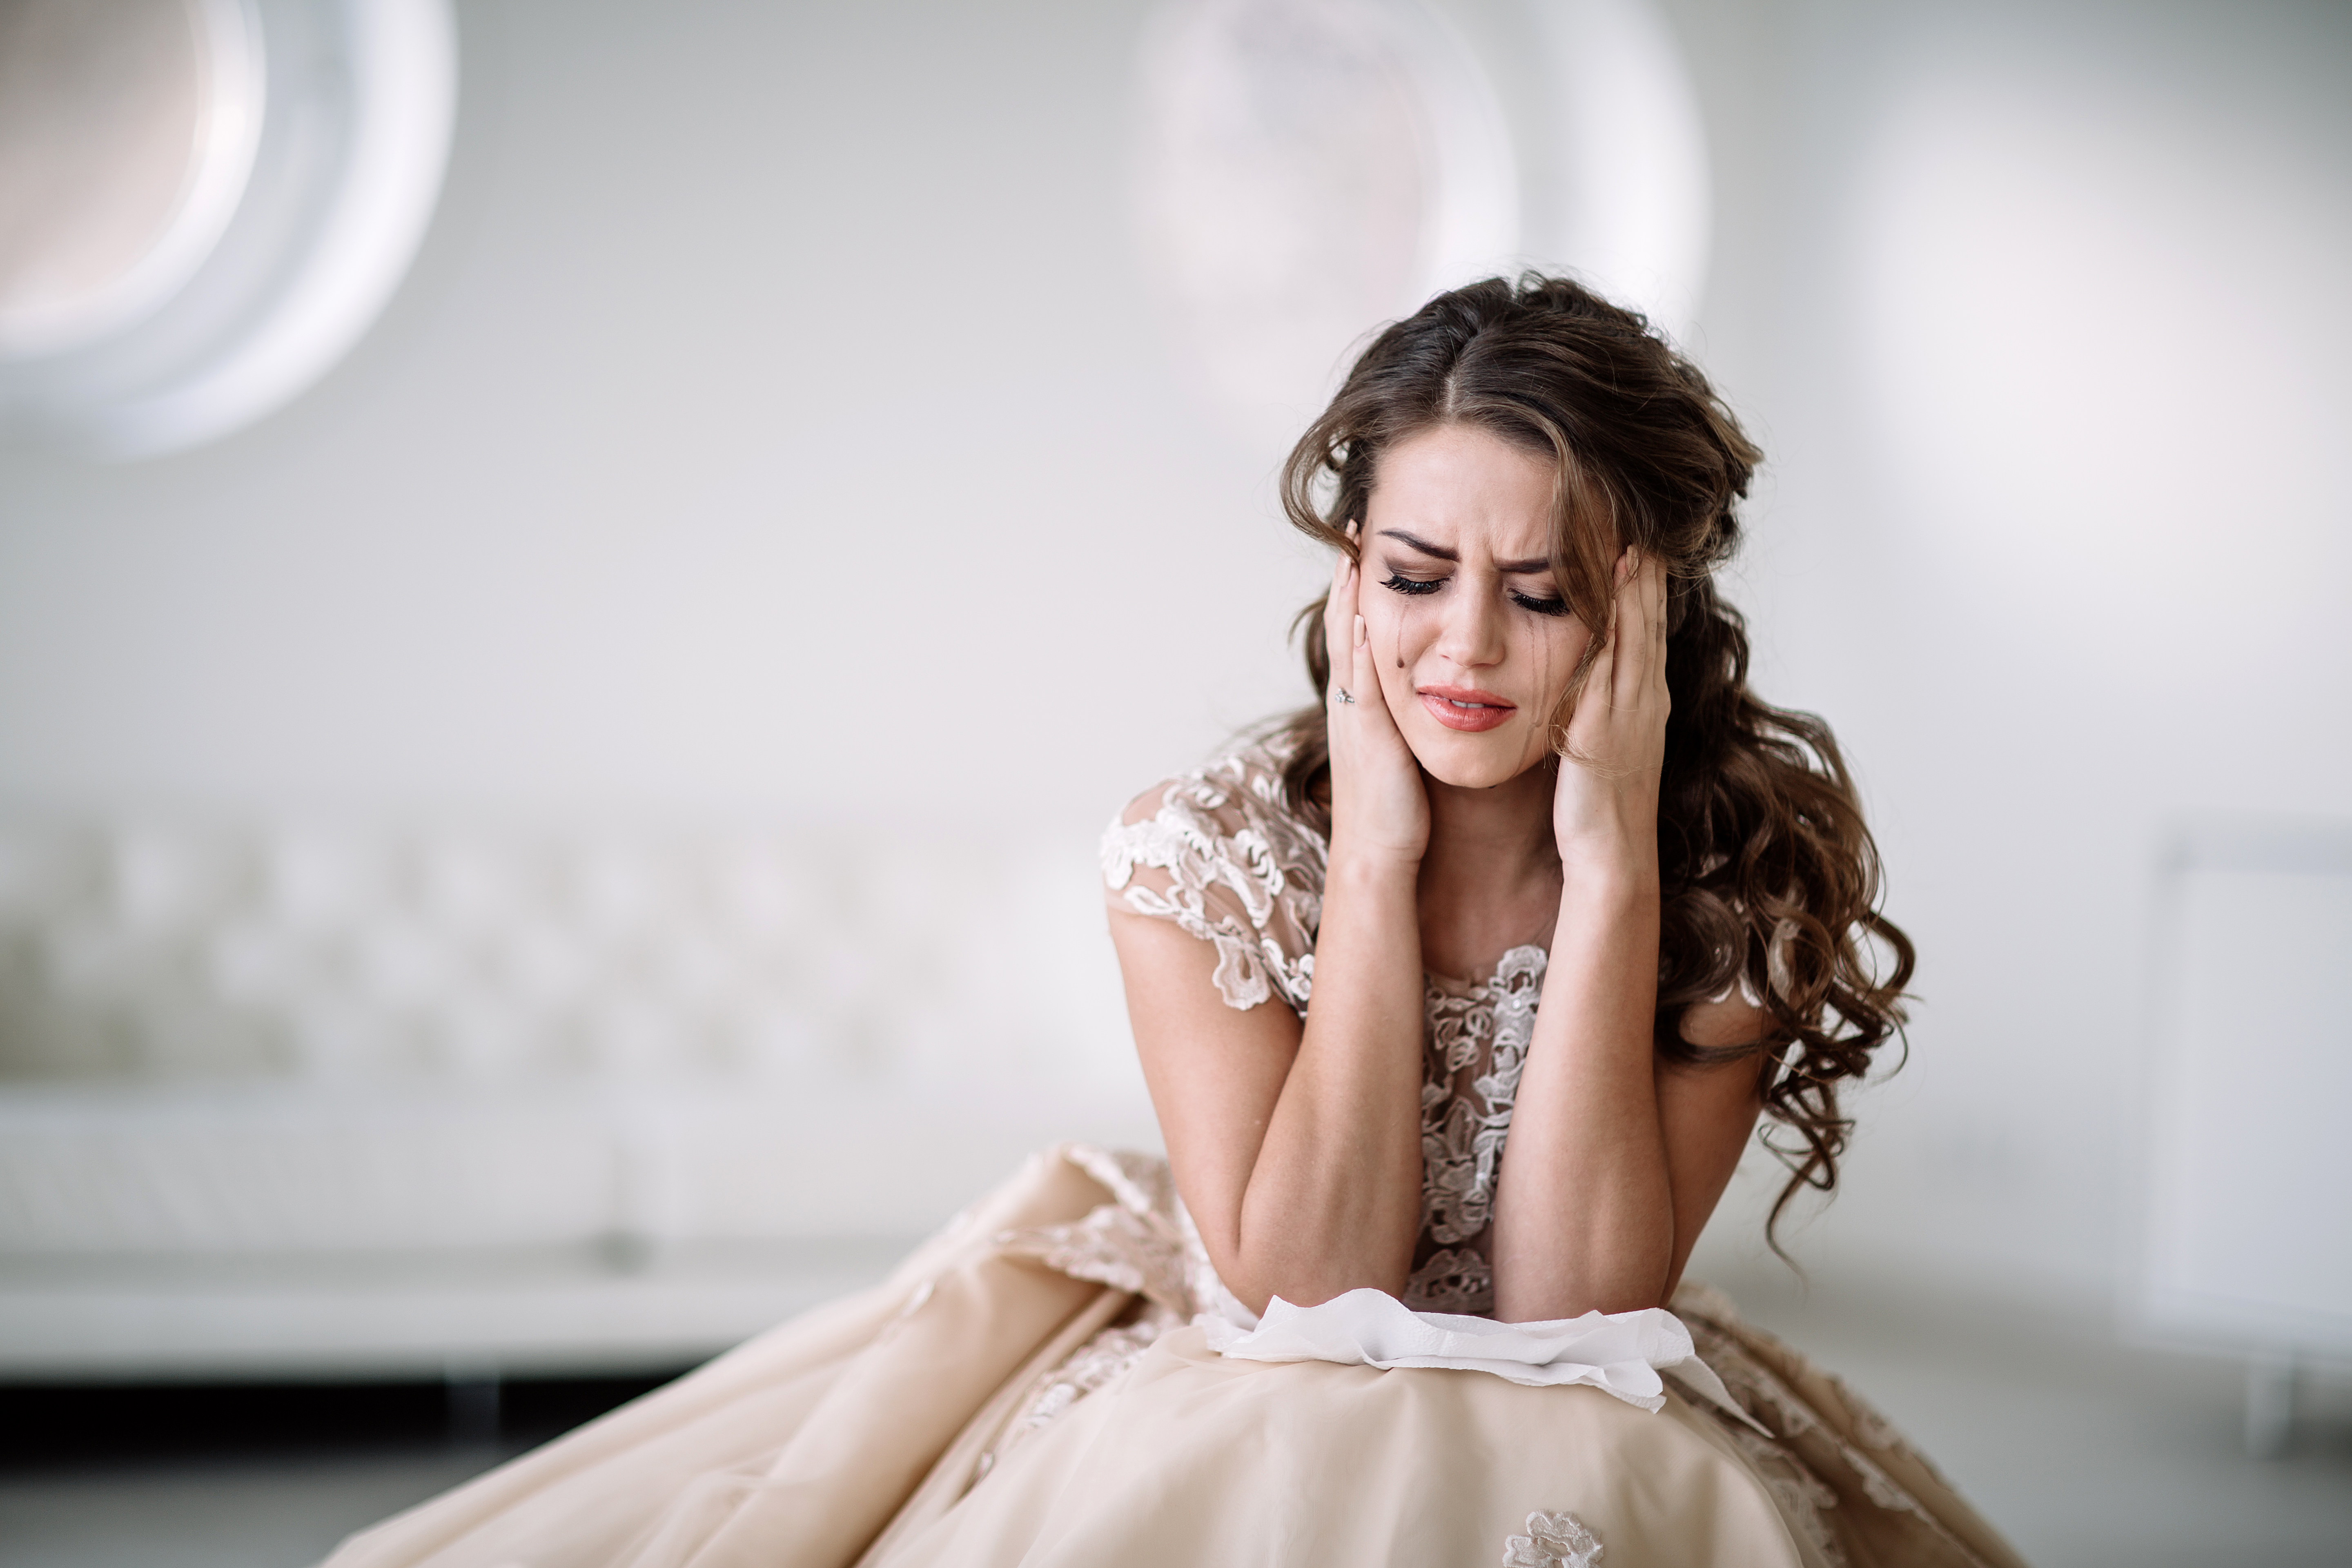 A bride crying | Source: Shutterstock